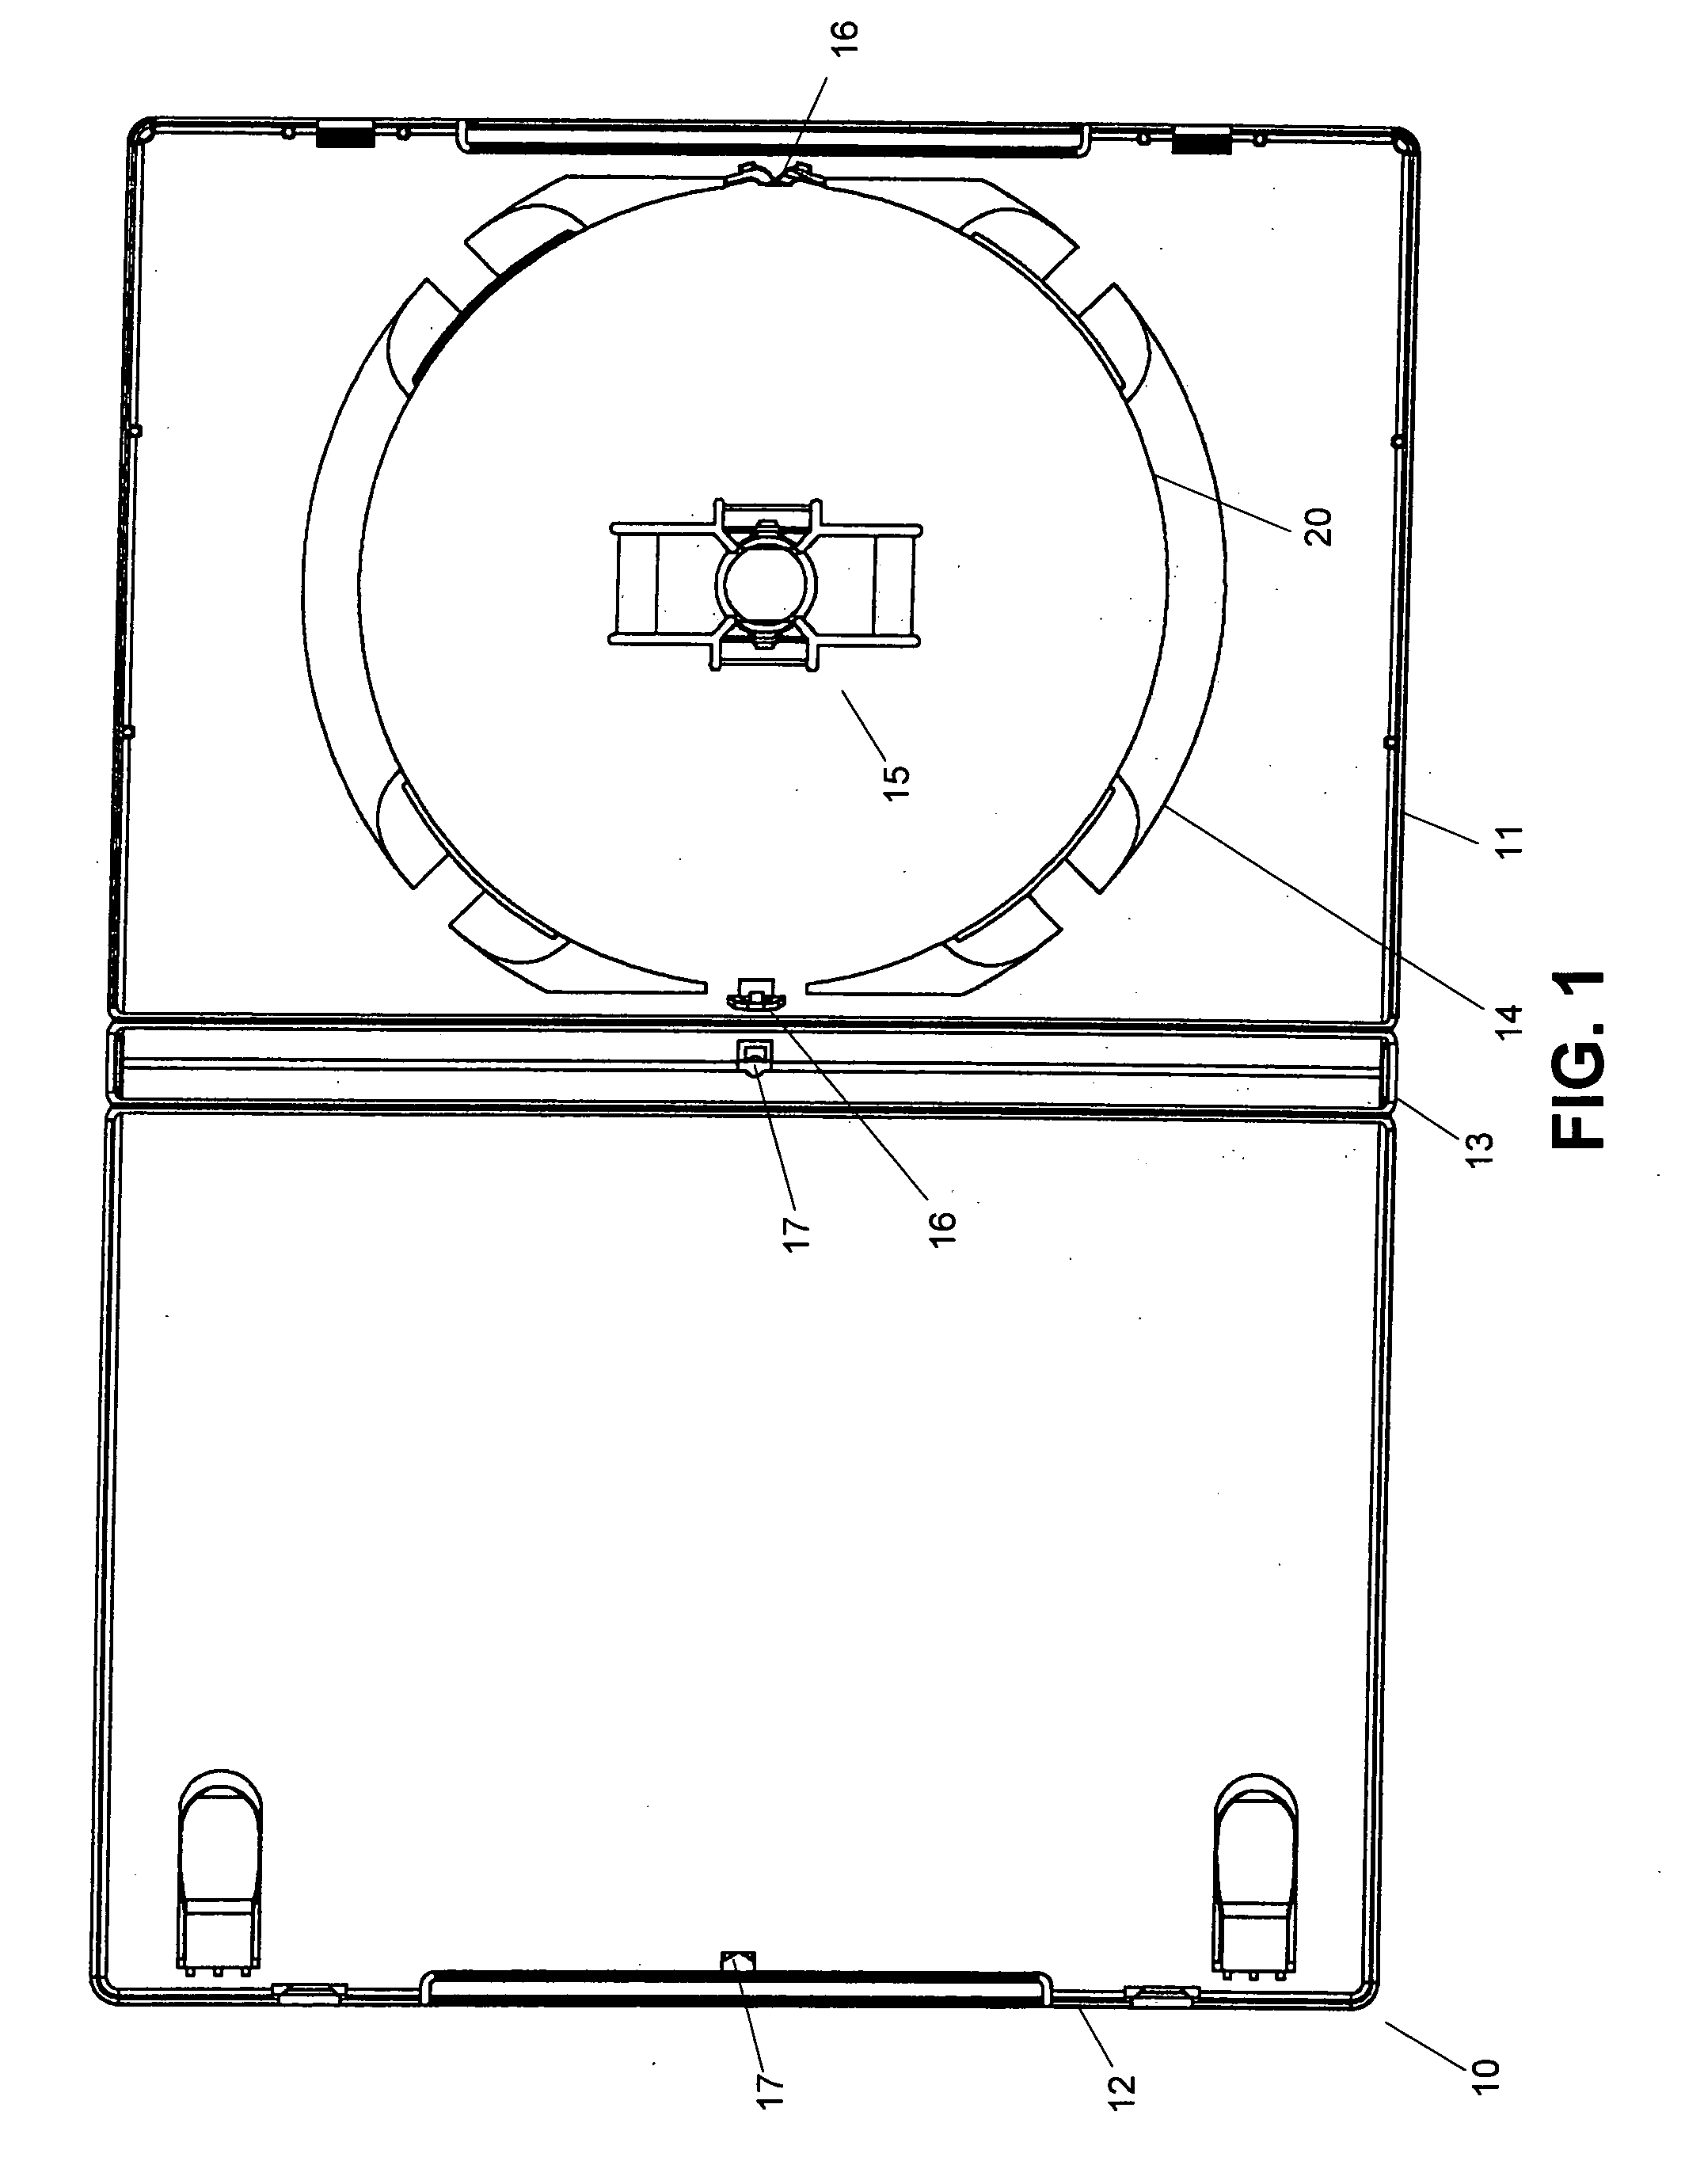 Apparatus for holding a media storage disk